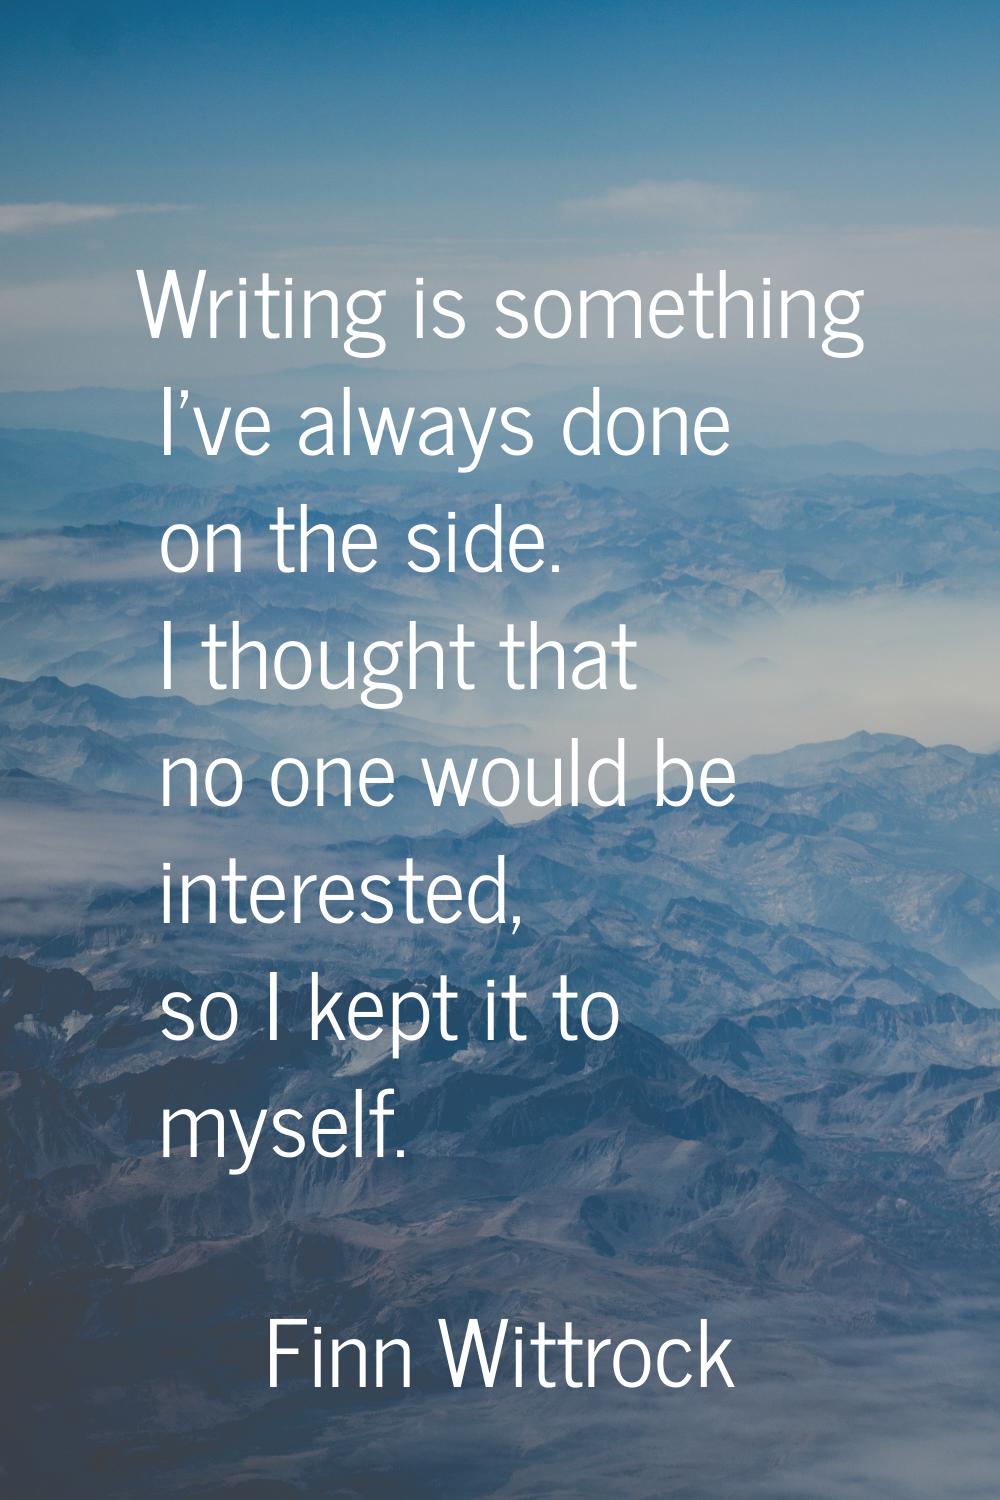 Writing is something I've always done on the side. I thought that no one would be interested, so I 